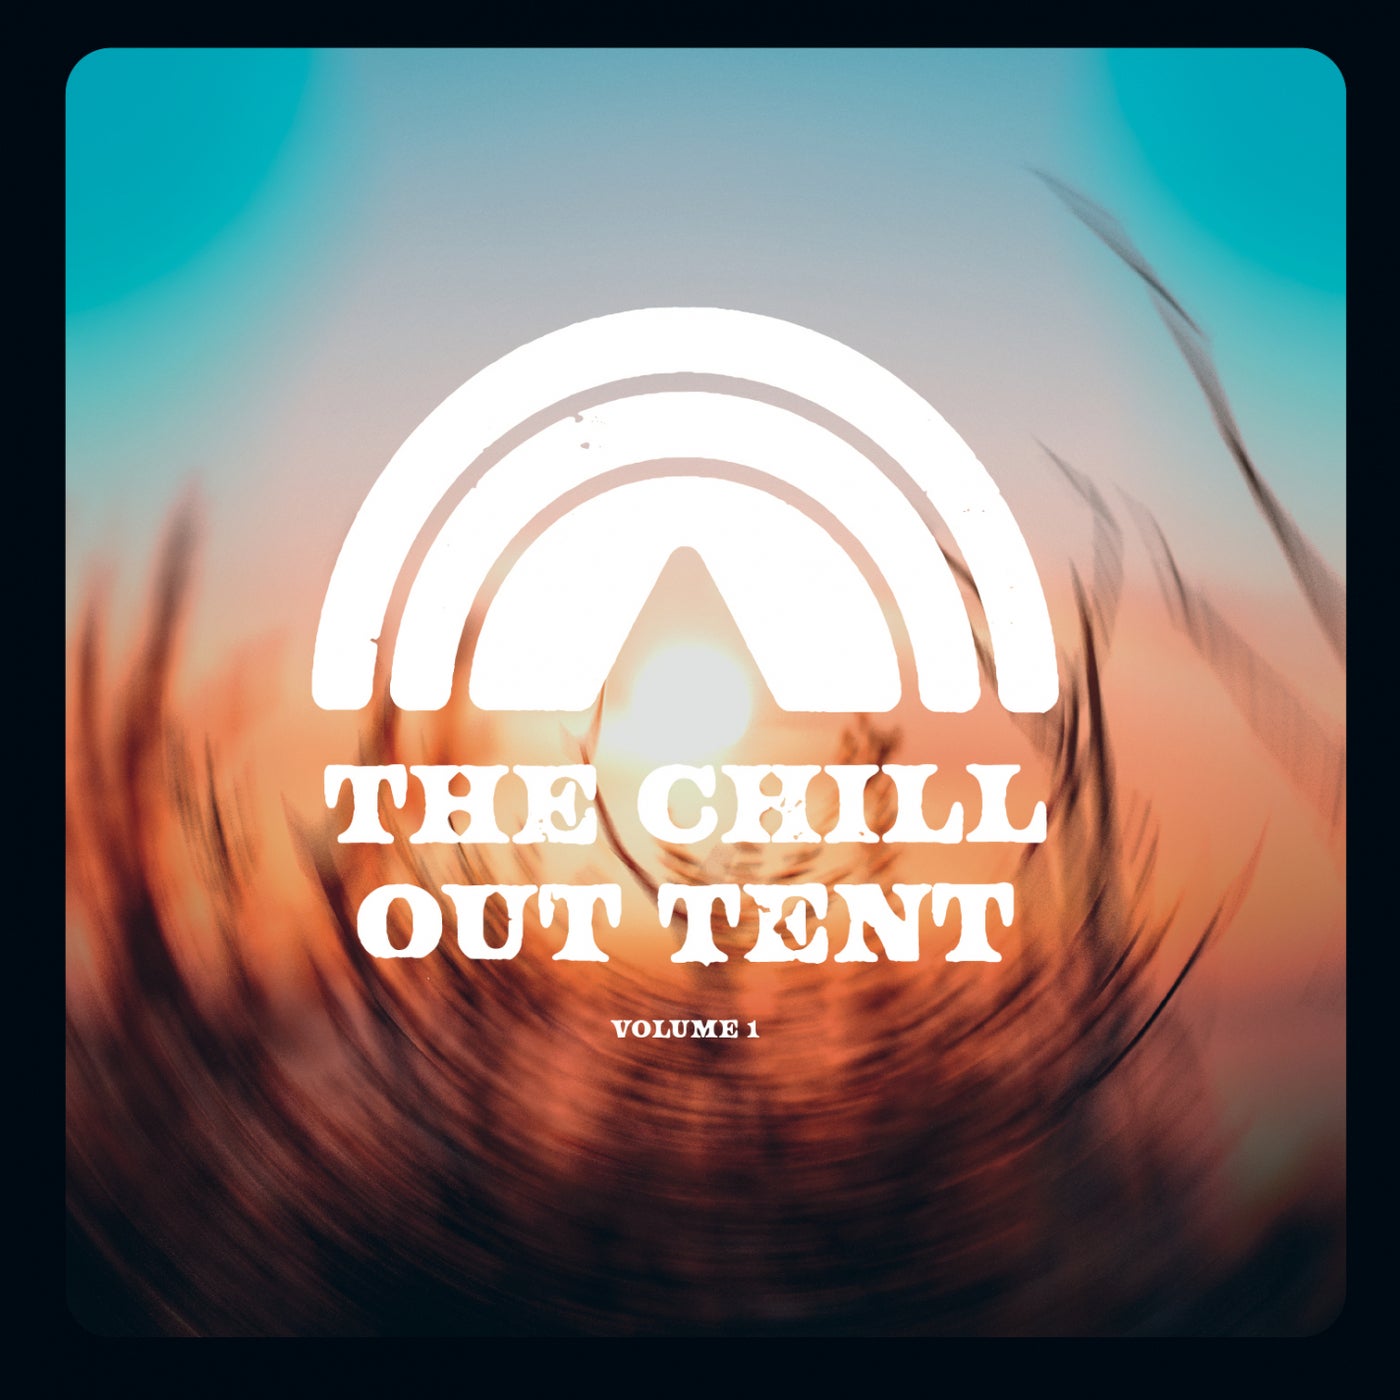 Blair French, Calm & Chris Coco - The Chill Out Tent, Vol. 1 [DSPPR]